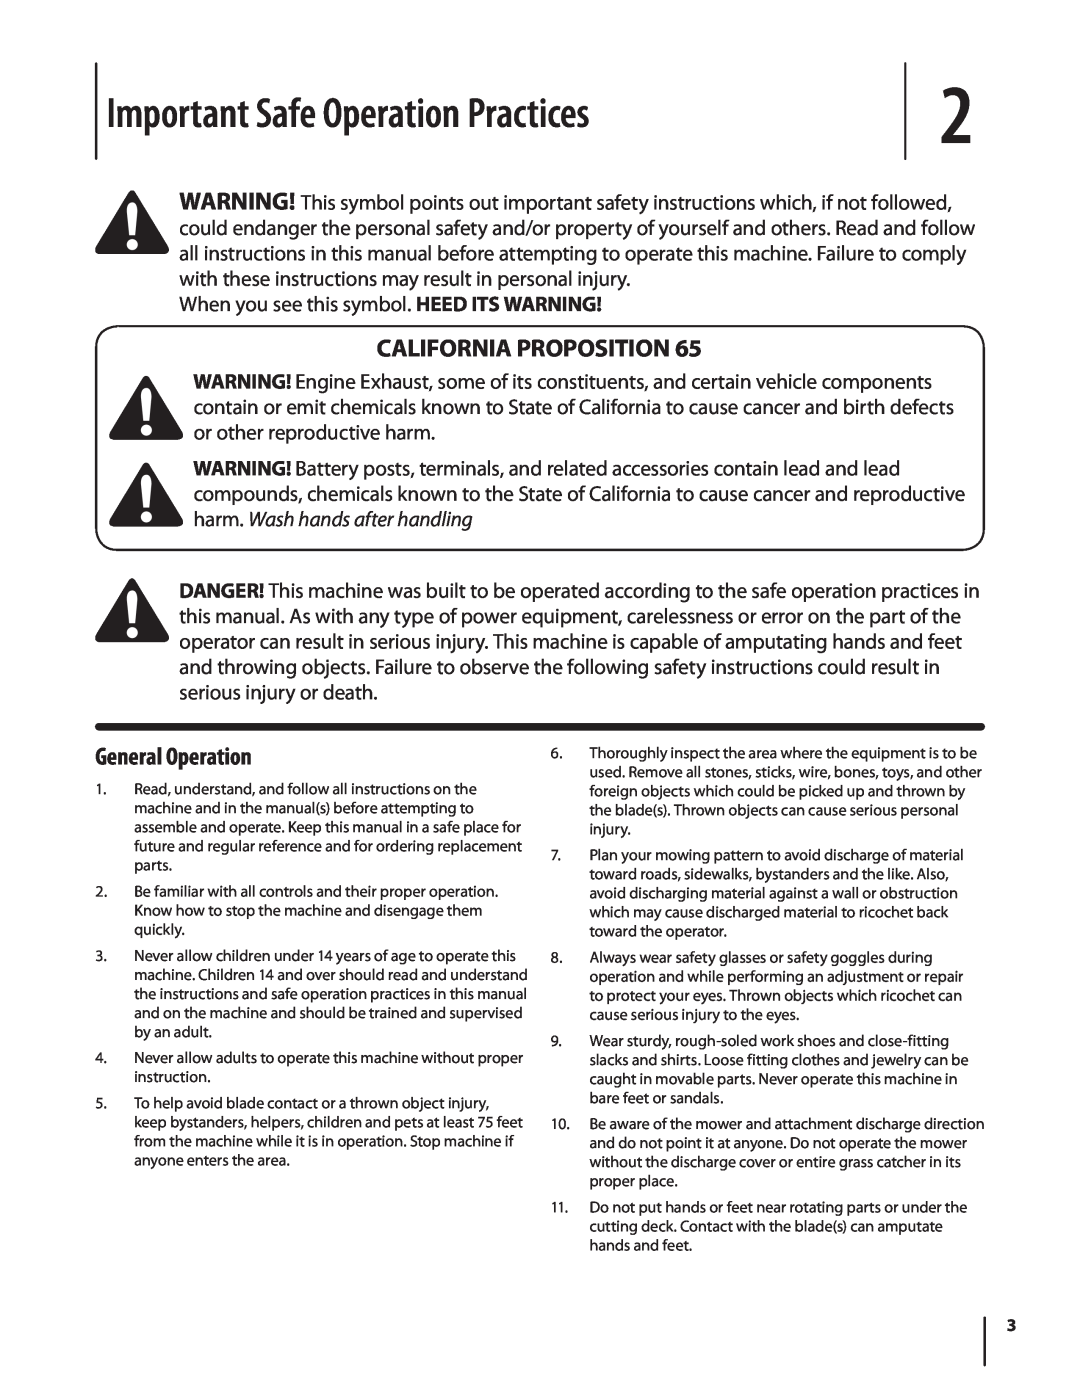 MTD 1742 warranty Important Safe Operation Practices, California Proposition, General Operation 